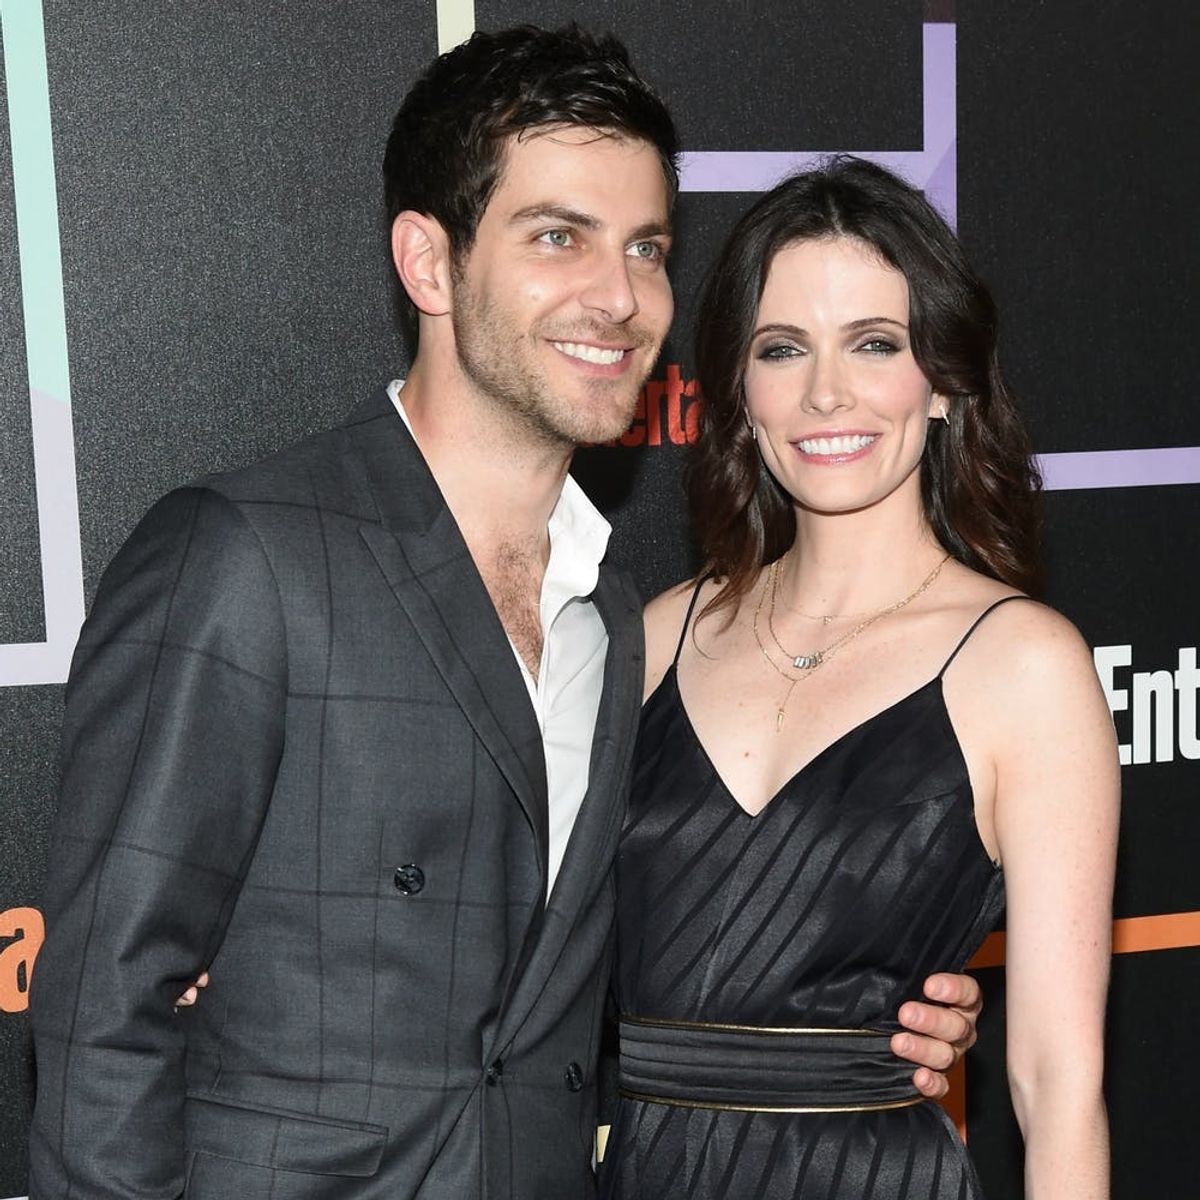 These Grimm Co-Stars Just Confirmed Their Engagement and the Vintage Ring Is TDF